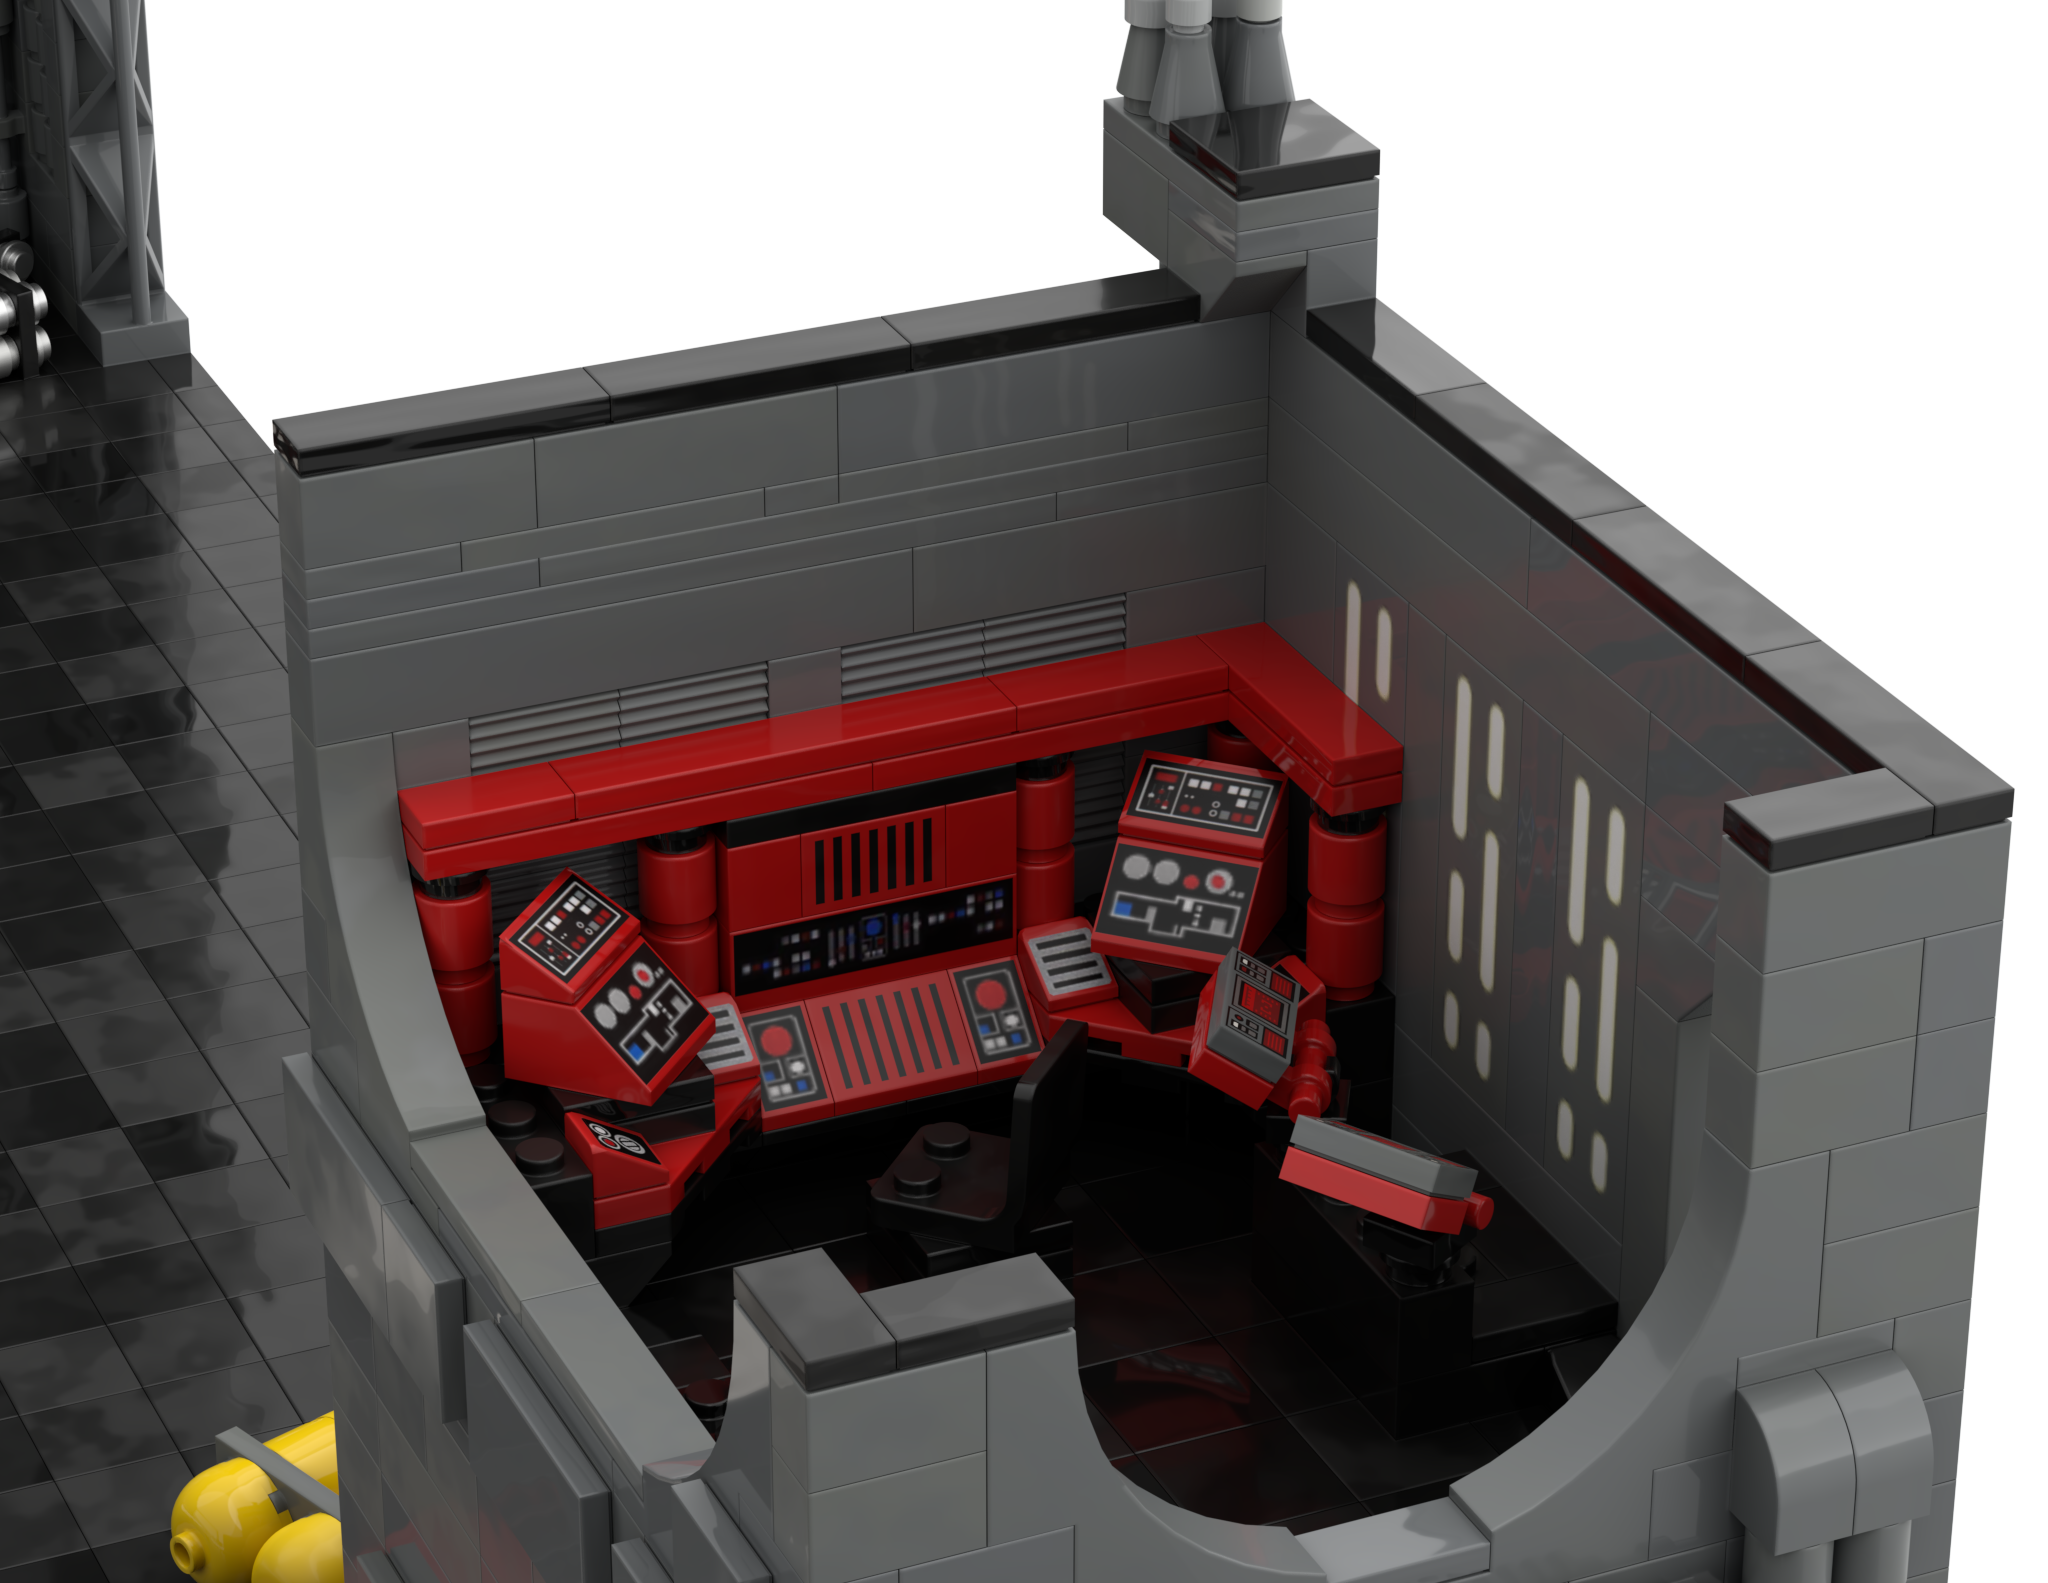 MOC-69457 Docking Bay 327 With 10061 Pieces